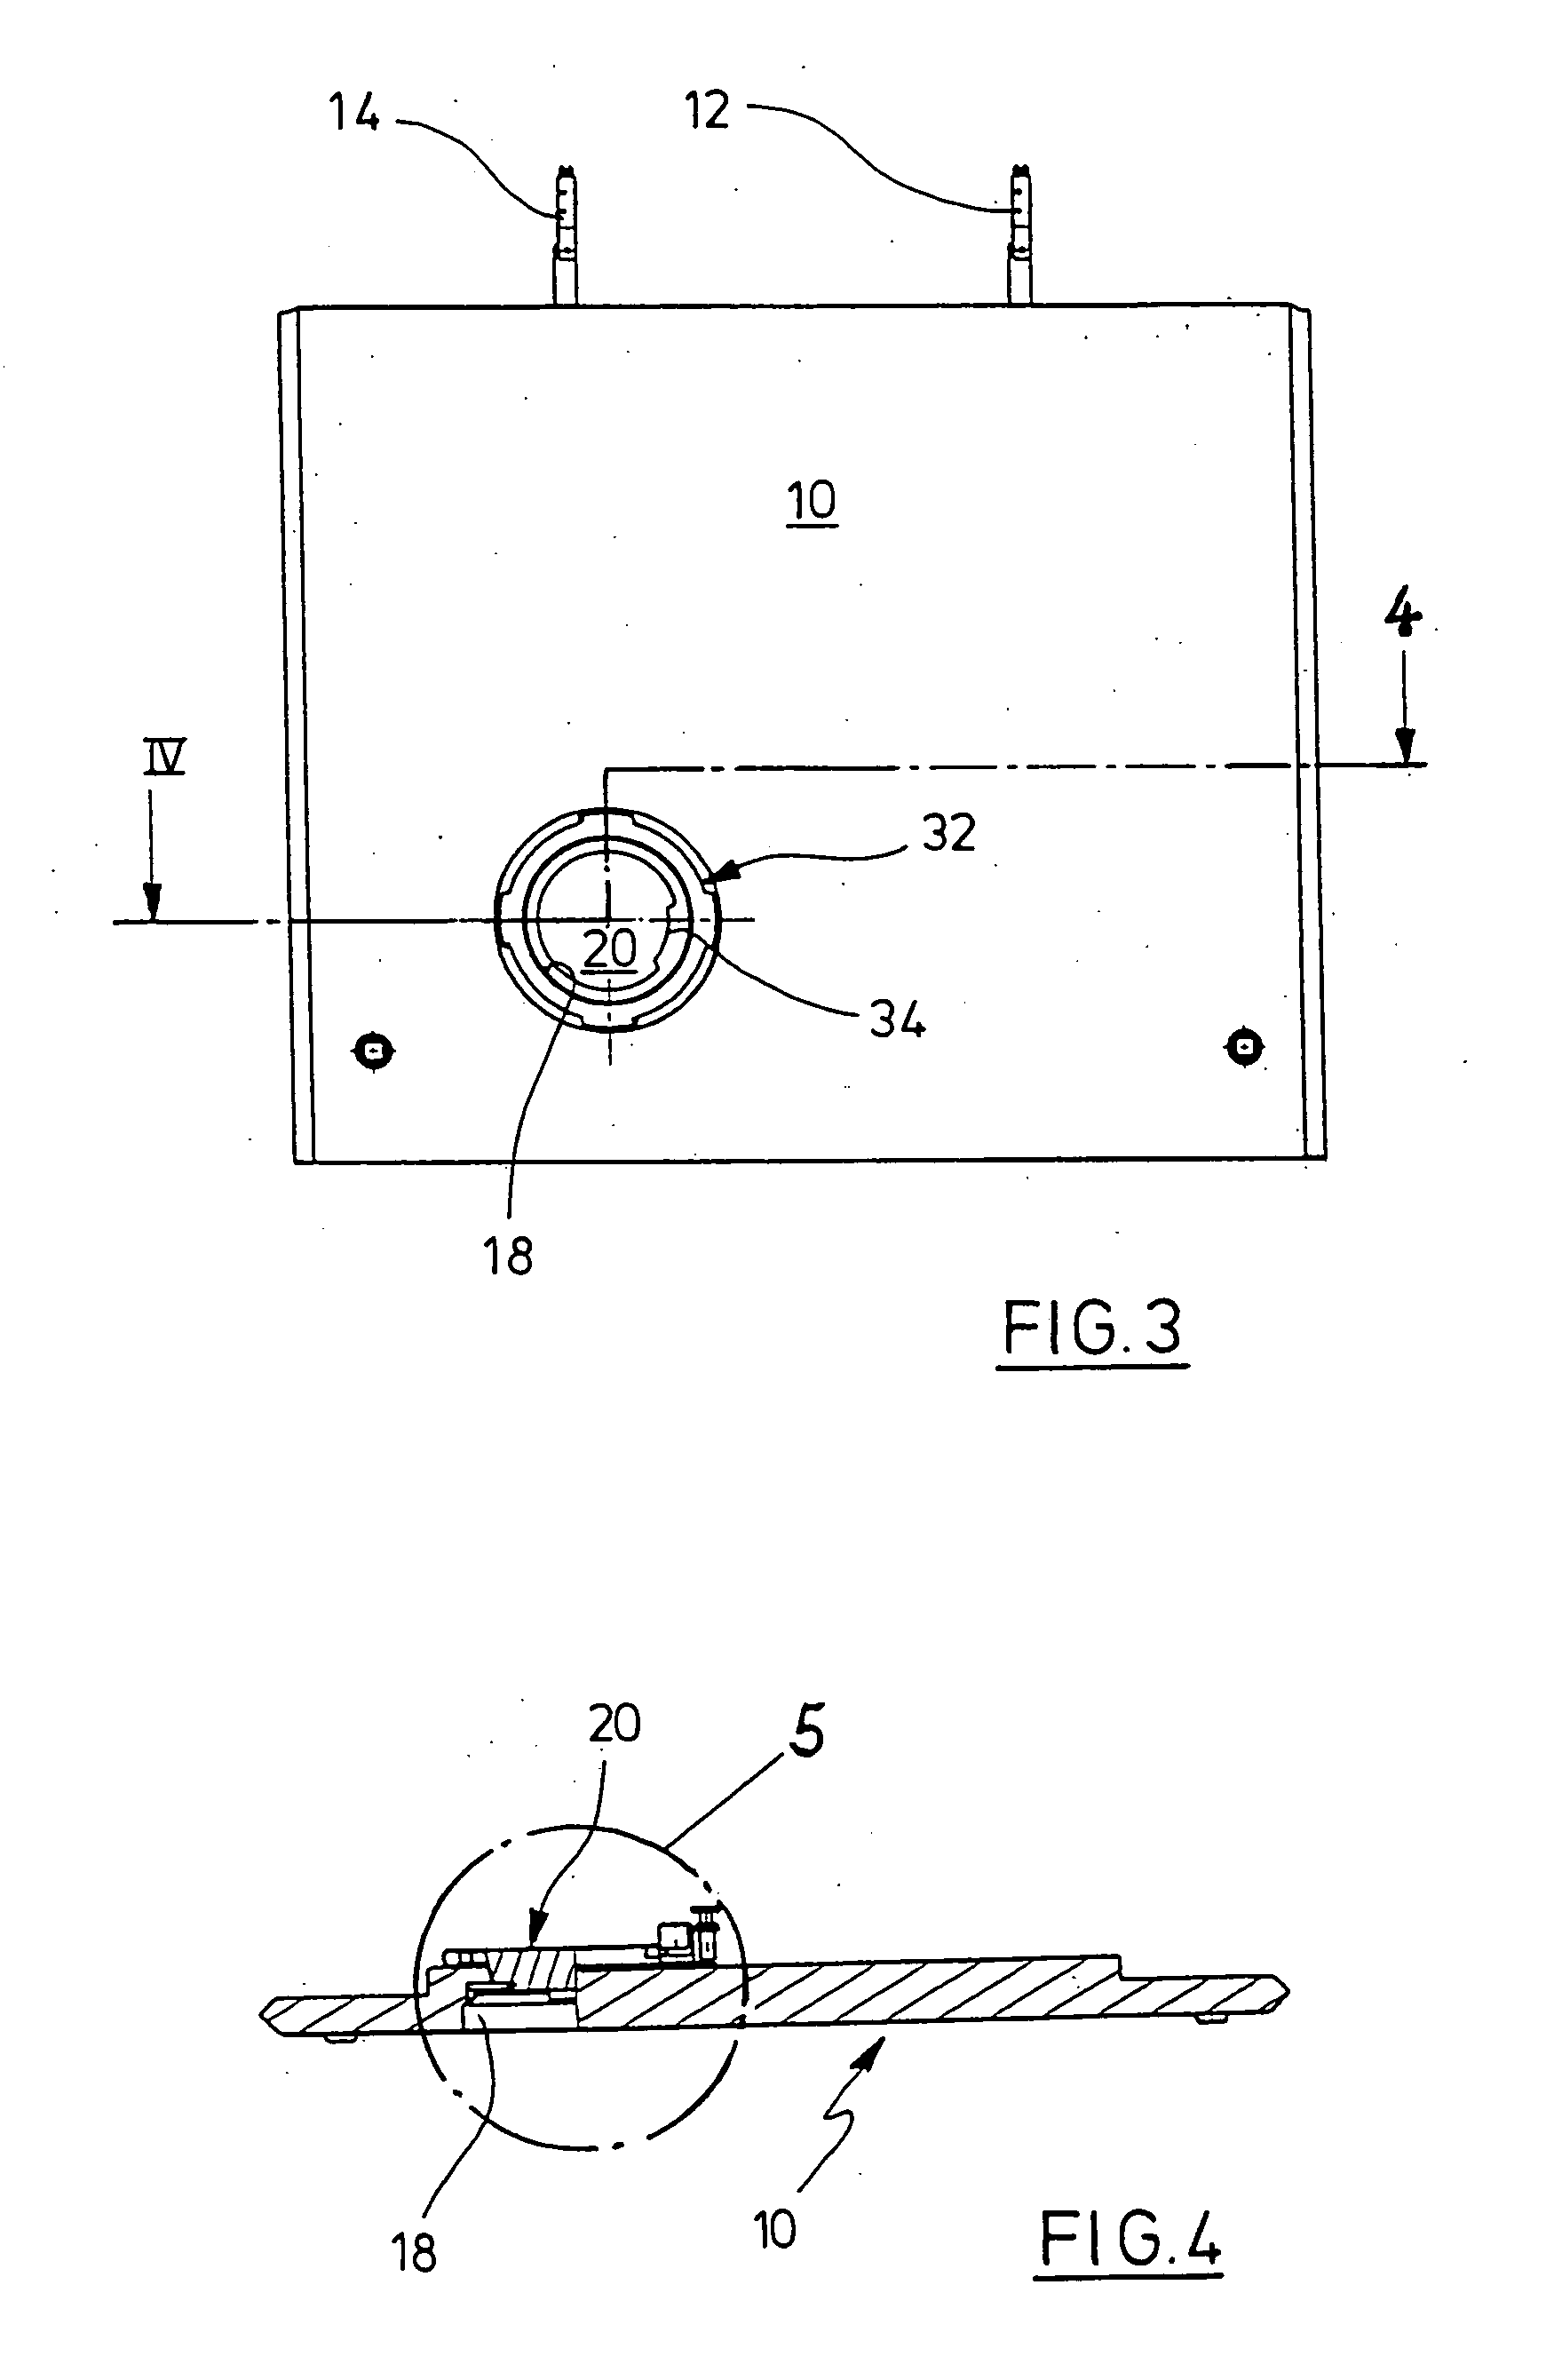 Transfer lock for a tabletting plant